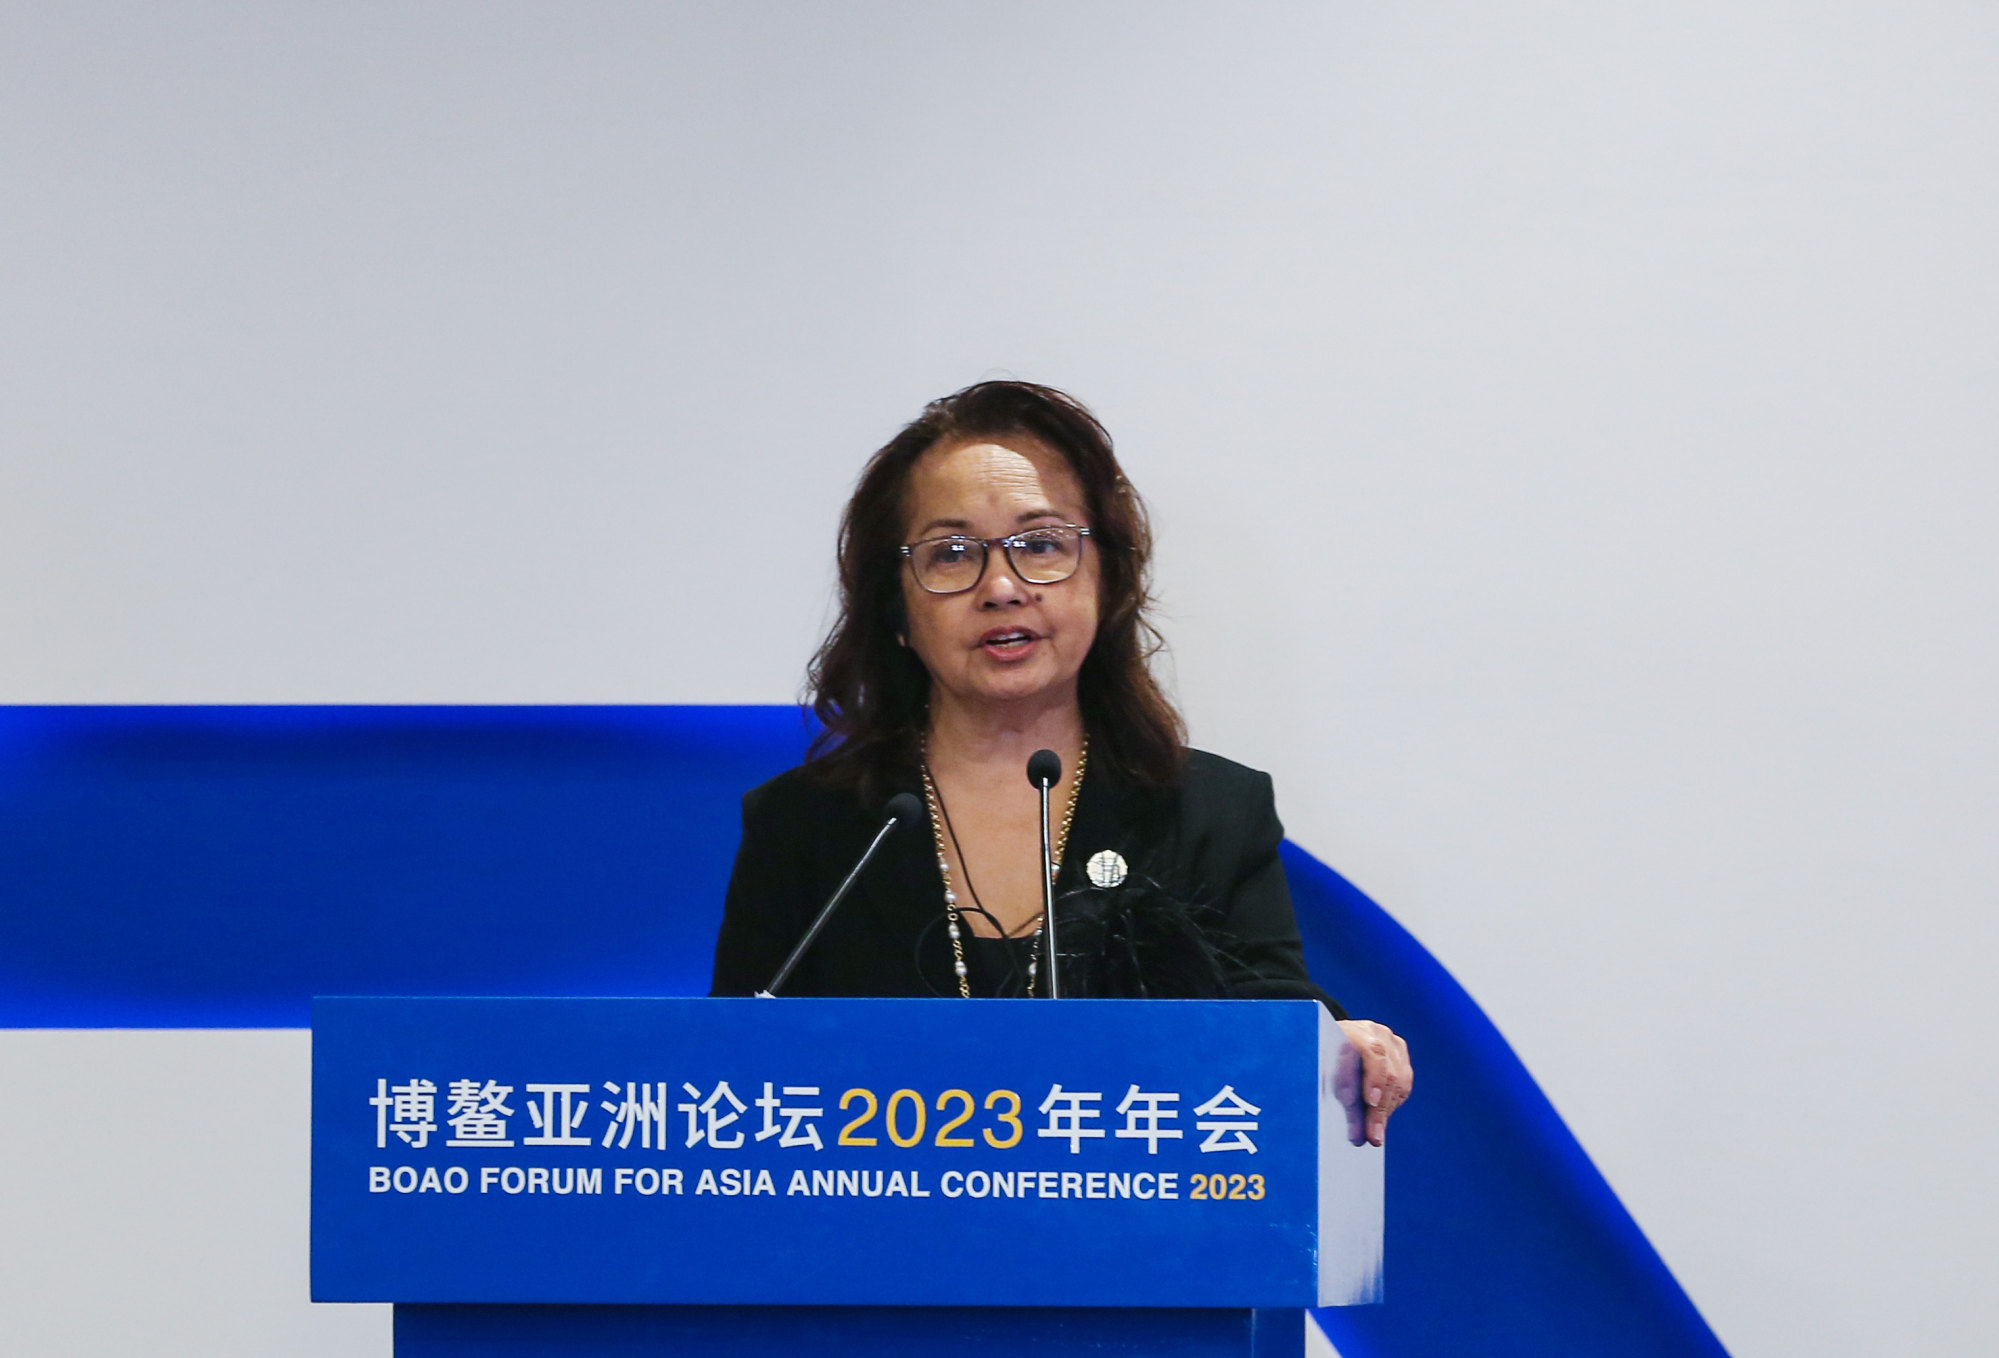 Former Philippine president Gloria Macapagal Arroyo speaks at a session on building cooperation and security in the South China Sea at the Boao Forum for Asia in south China’s Hainan province. Photo: Xinhua